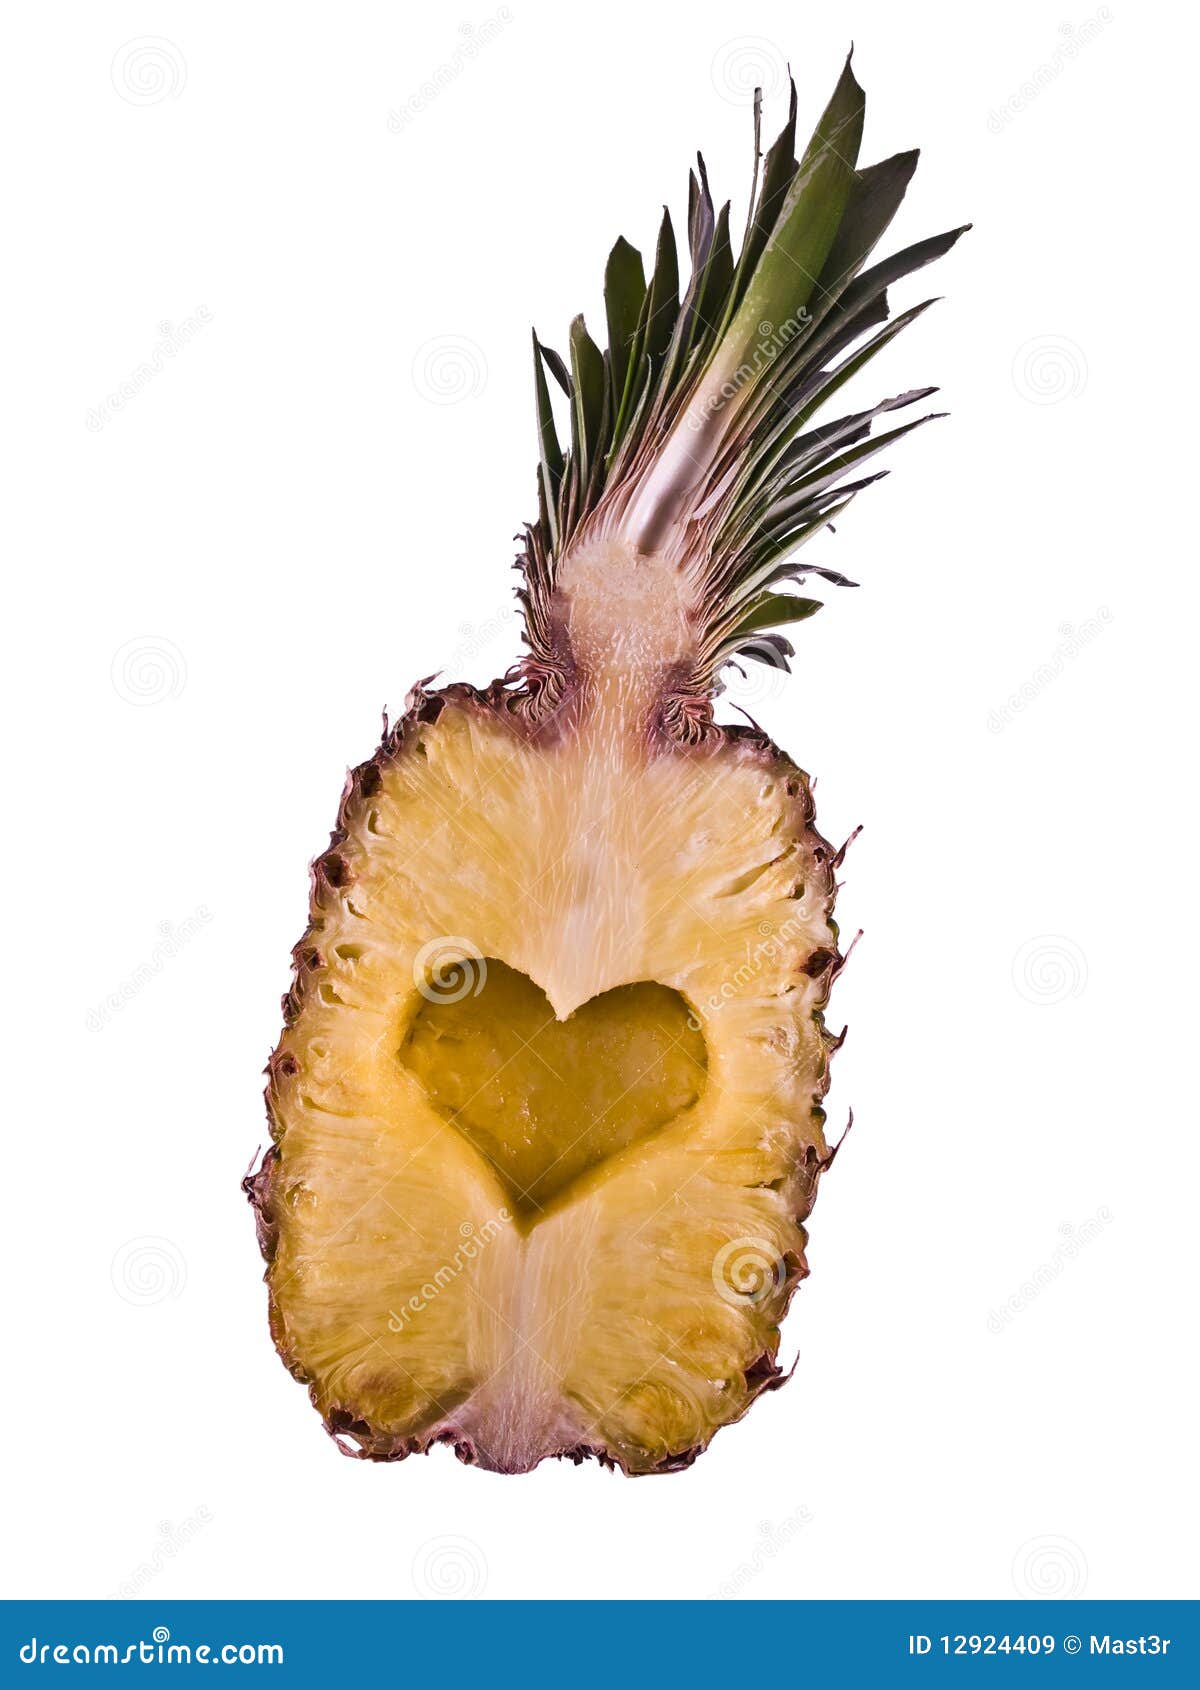 Pineapple Heart Cutted Heart Royalty Free Stock Images ...